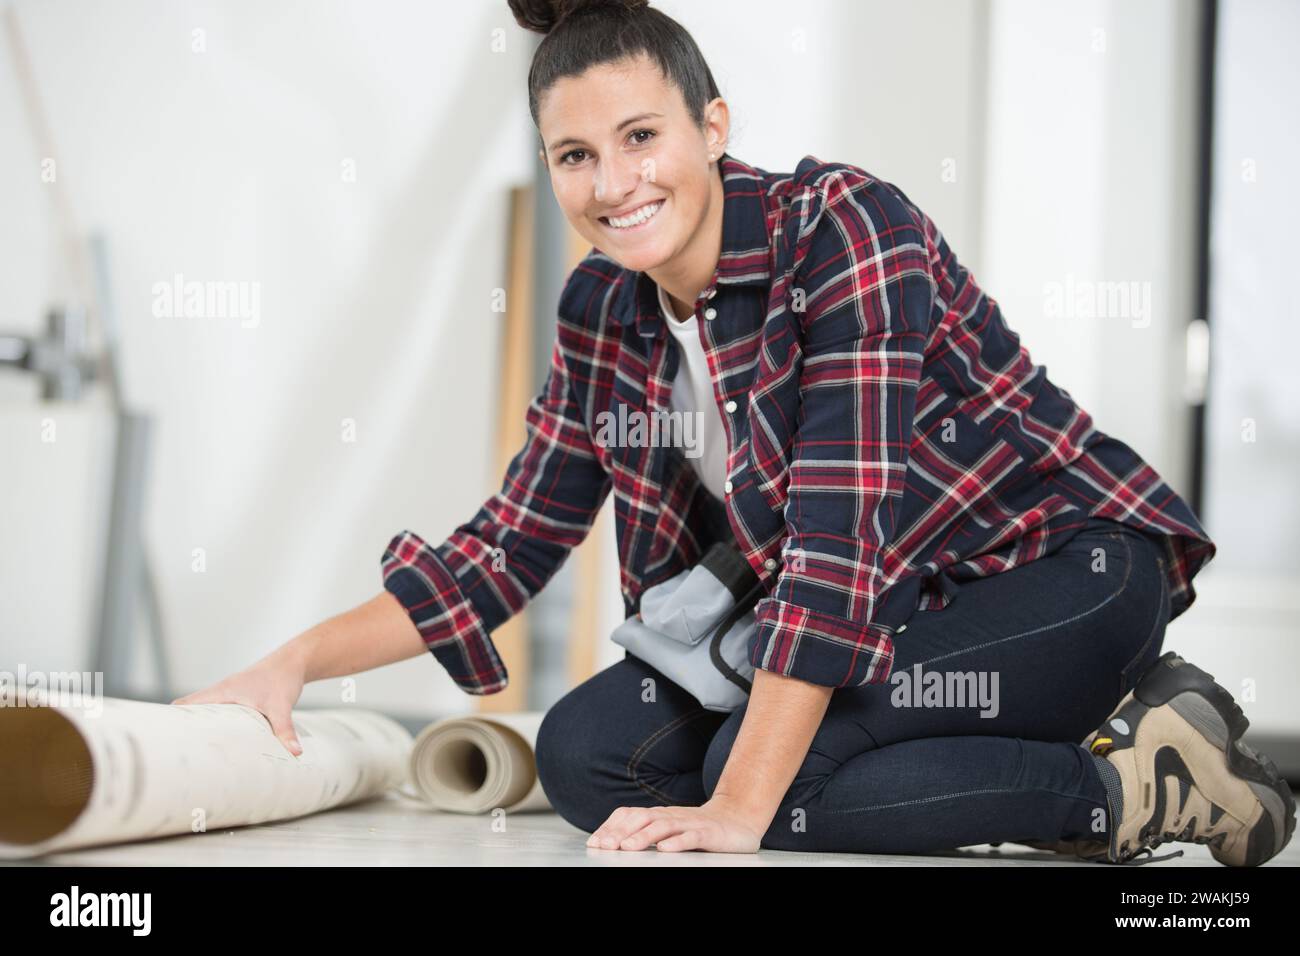 happy woman is unrolling a new carpet Stock Photo